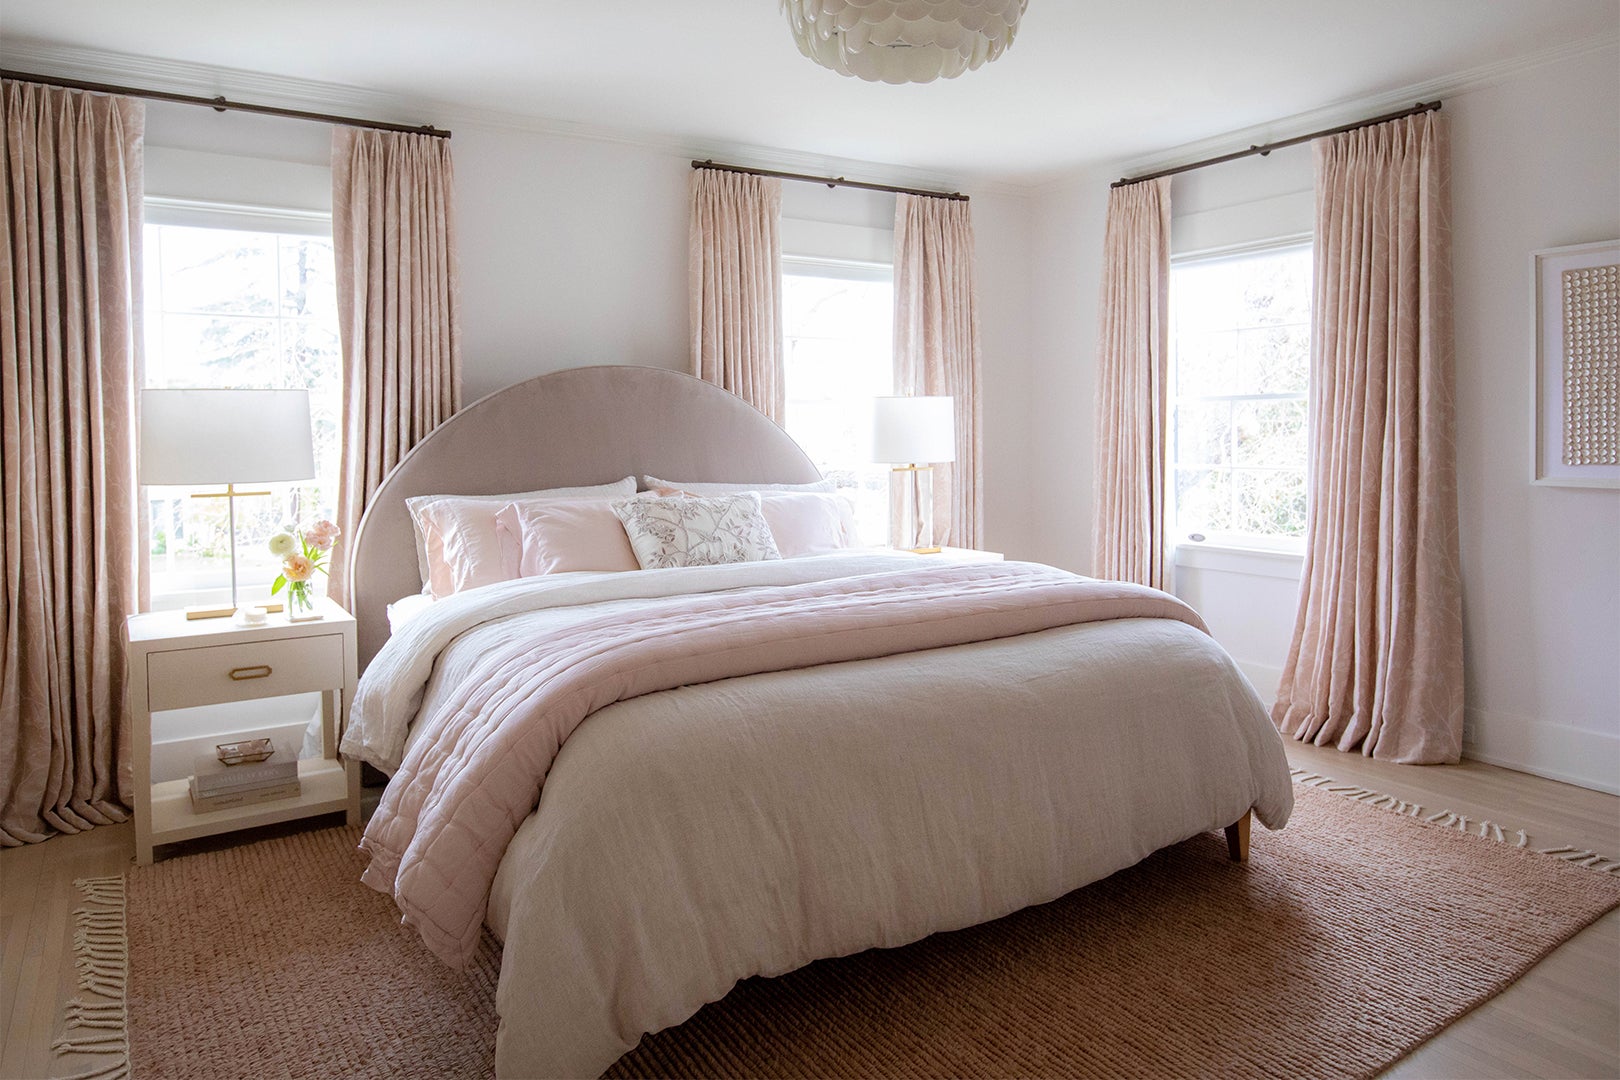 Bedroom with pink curtains and white and pink bedding